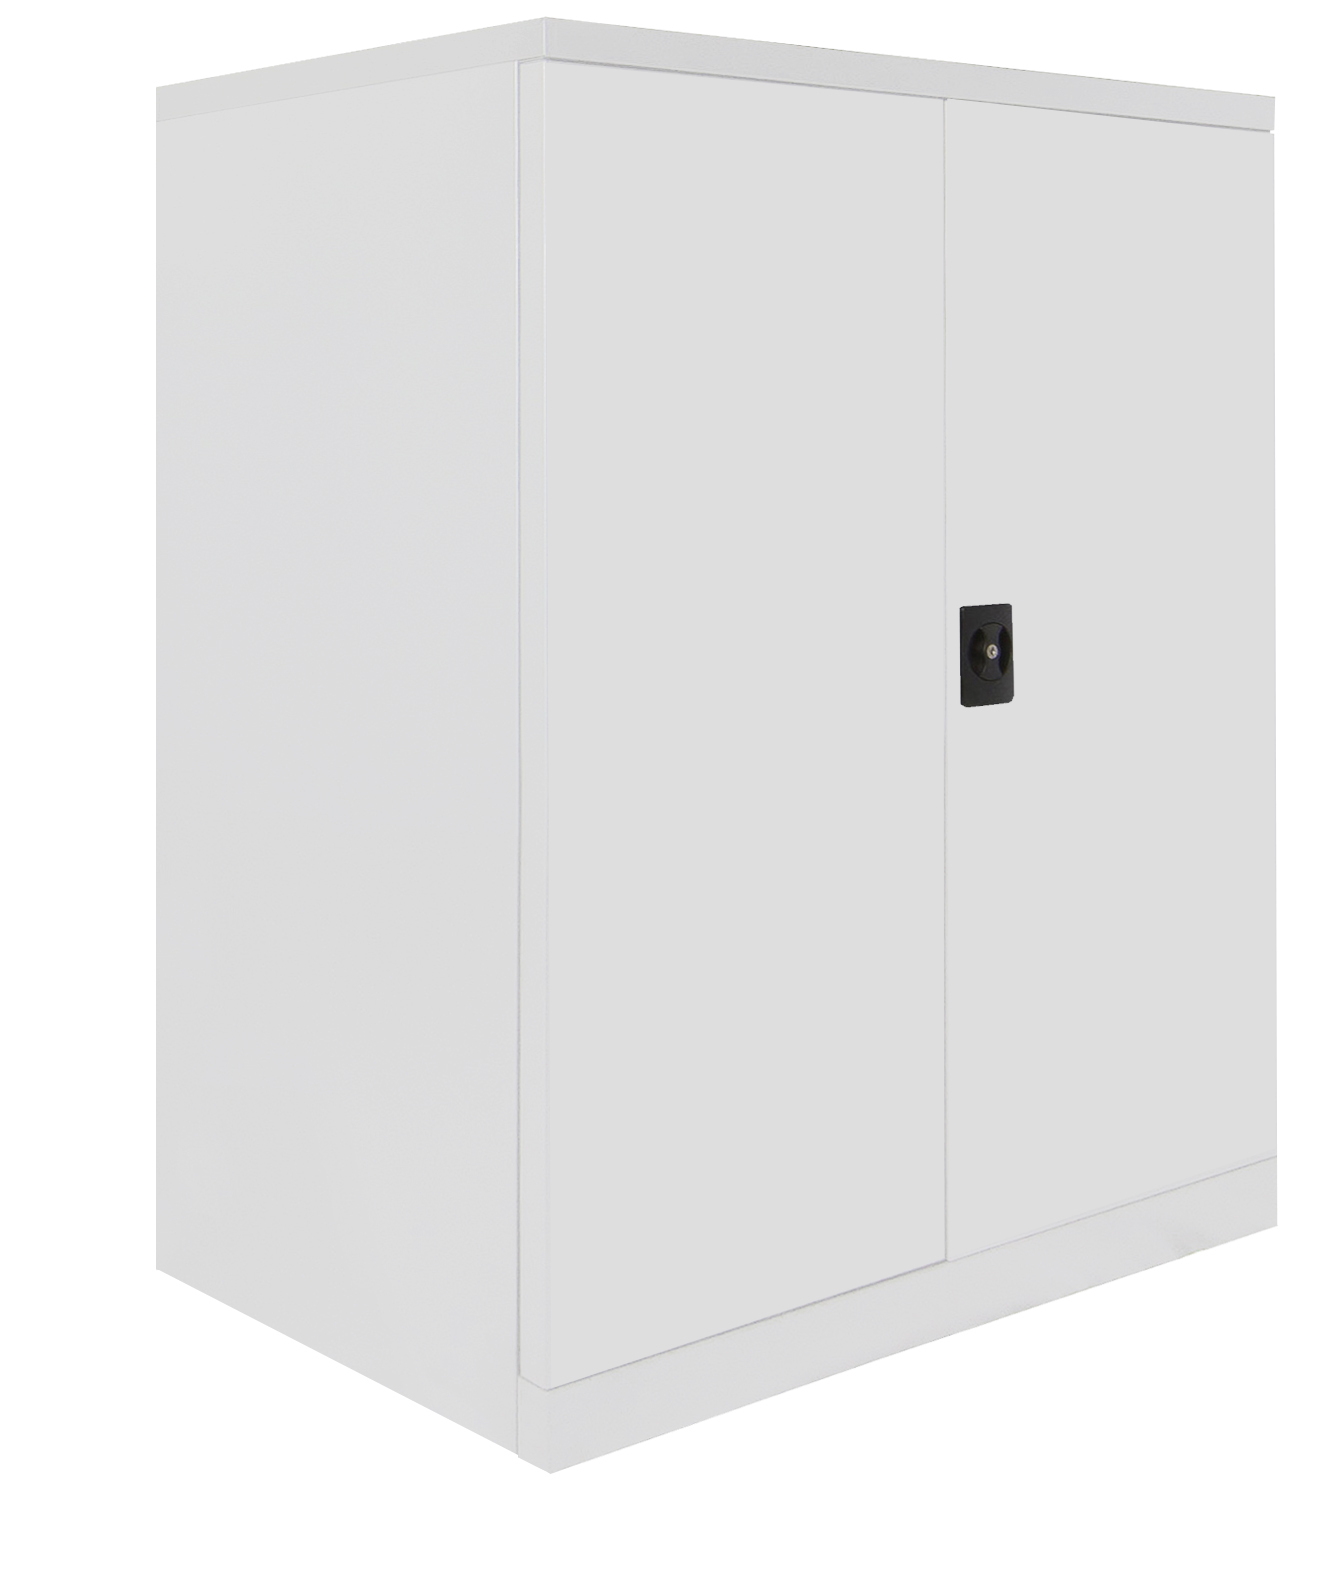 1/2 Height Cabinet 1015x910x450mm (HxWxD) -White